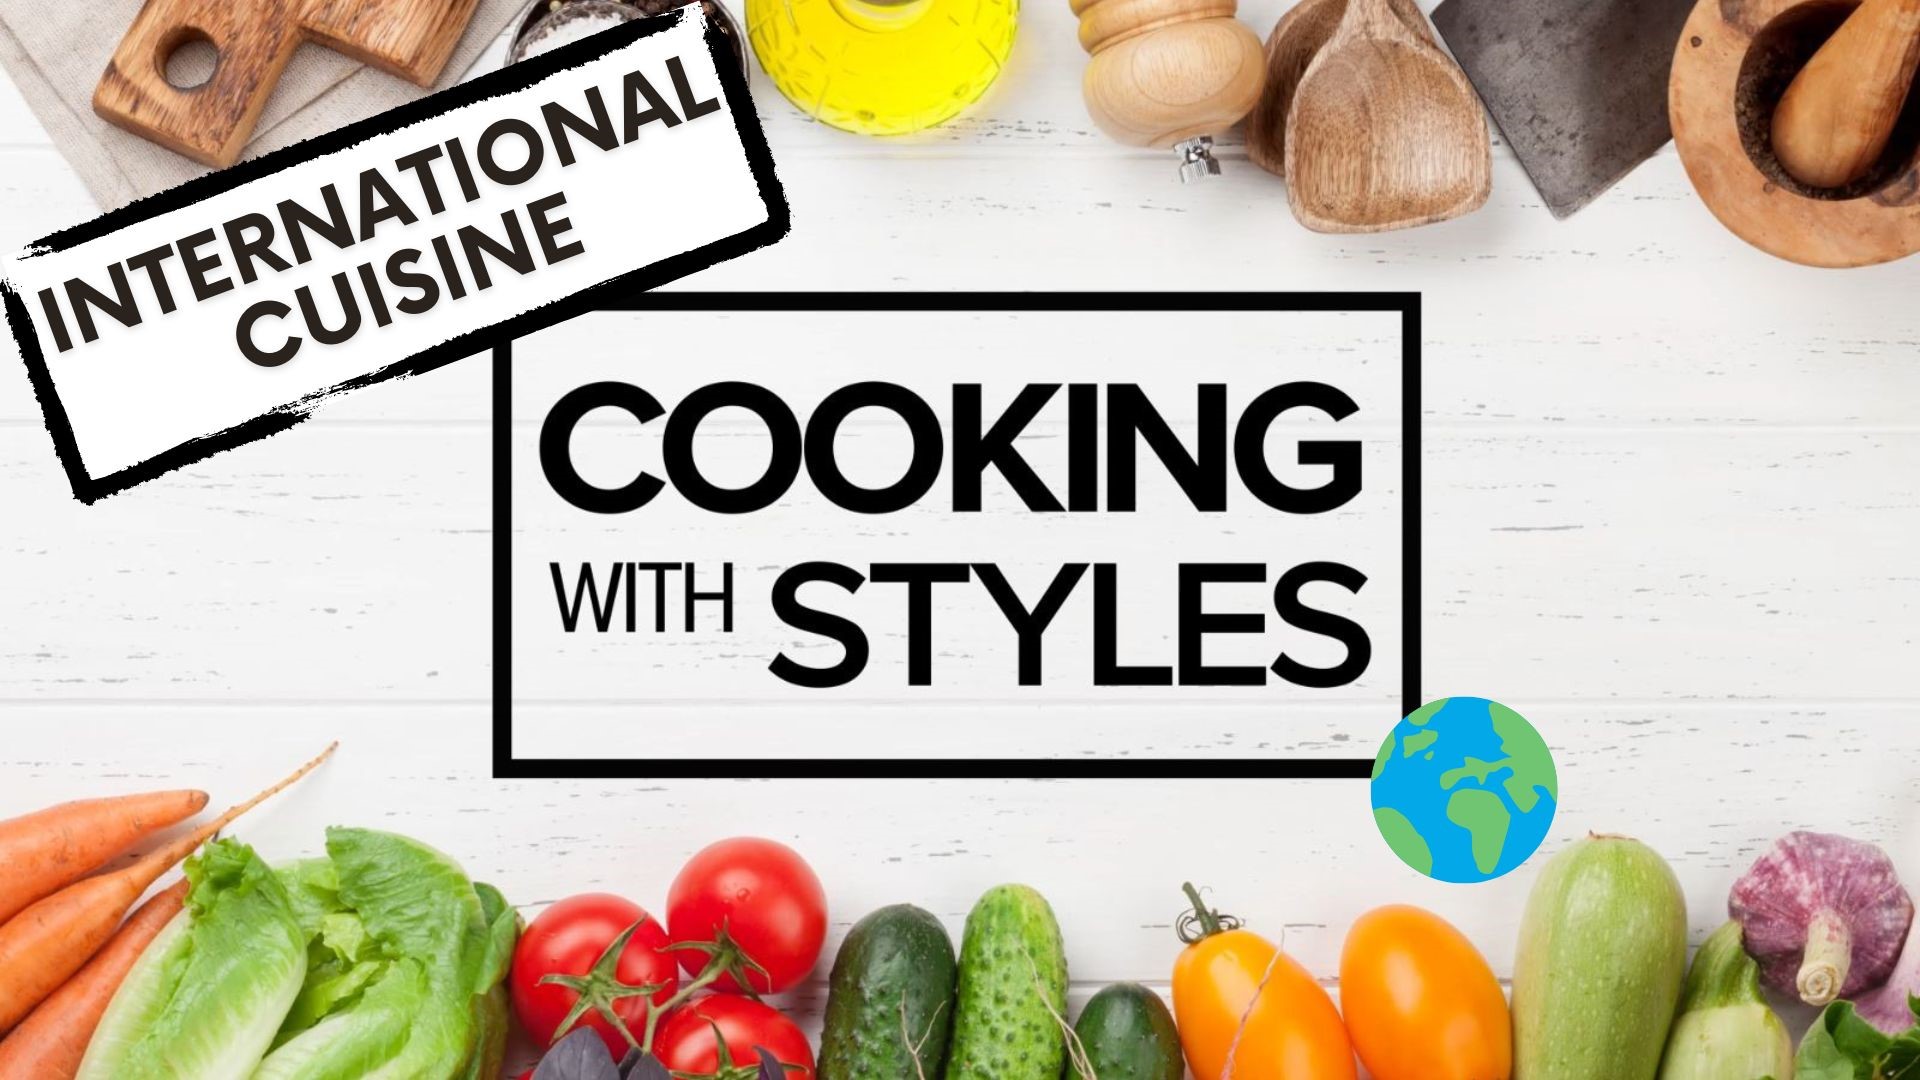 KFMB's Shawn Styles shows us how to make dishes from around the world. From Polish potato pancakes to Scottish gravlax, we take a trip without leaving the kitchen.